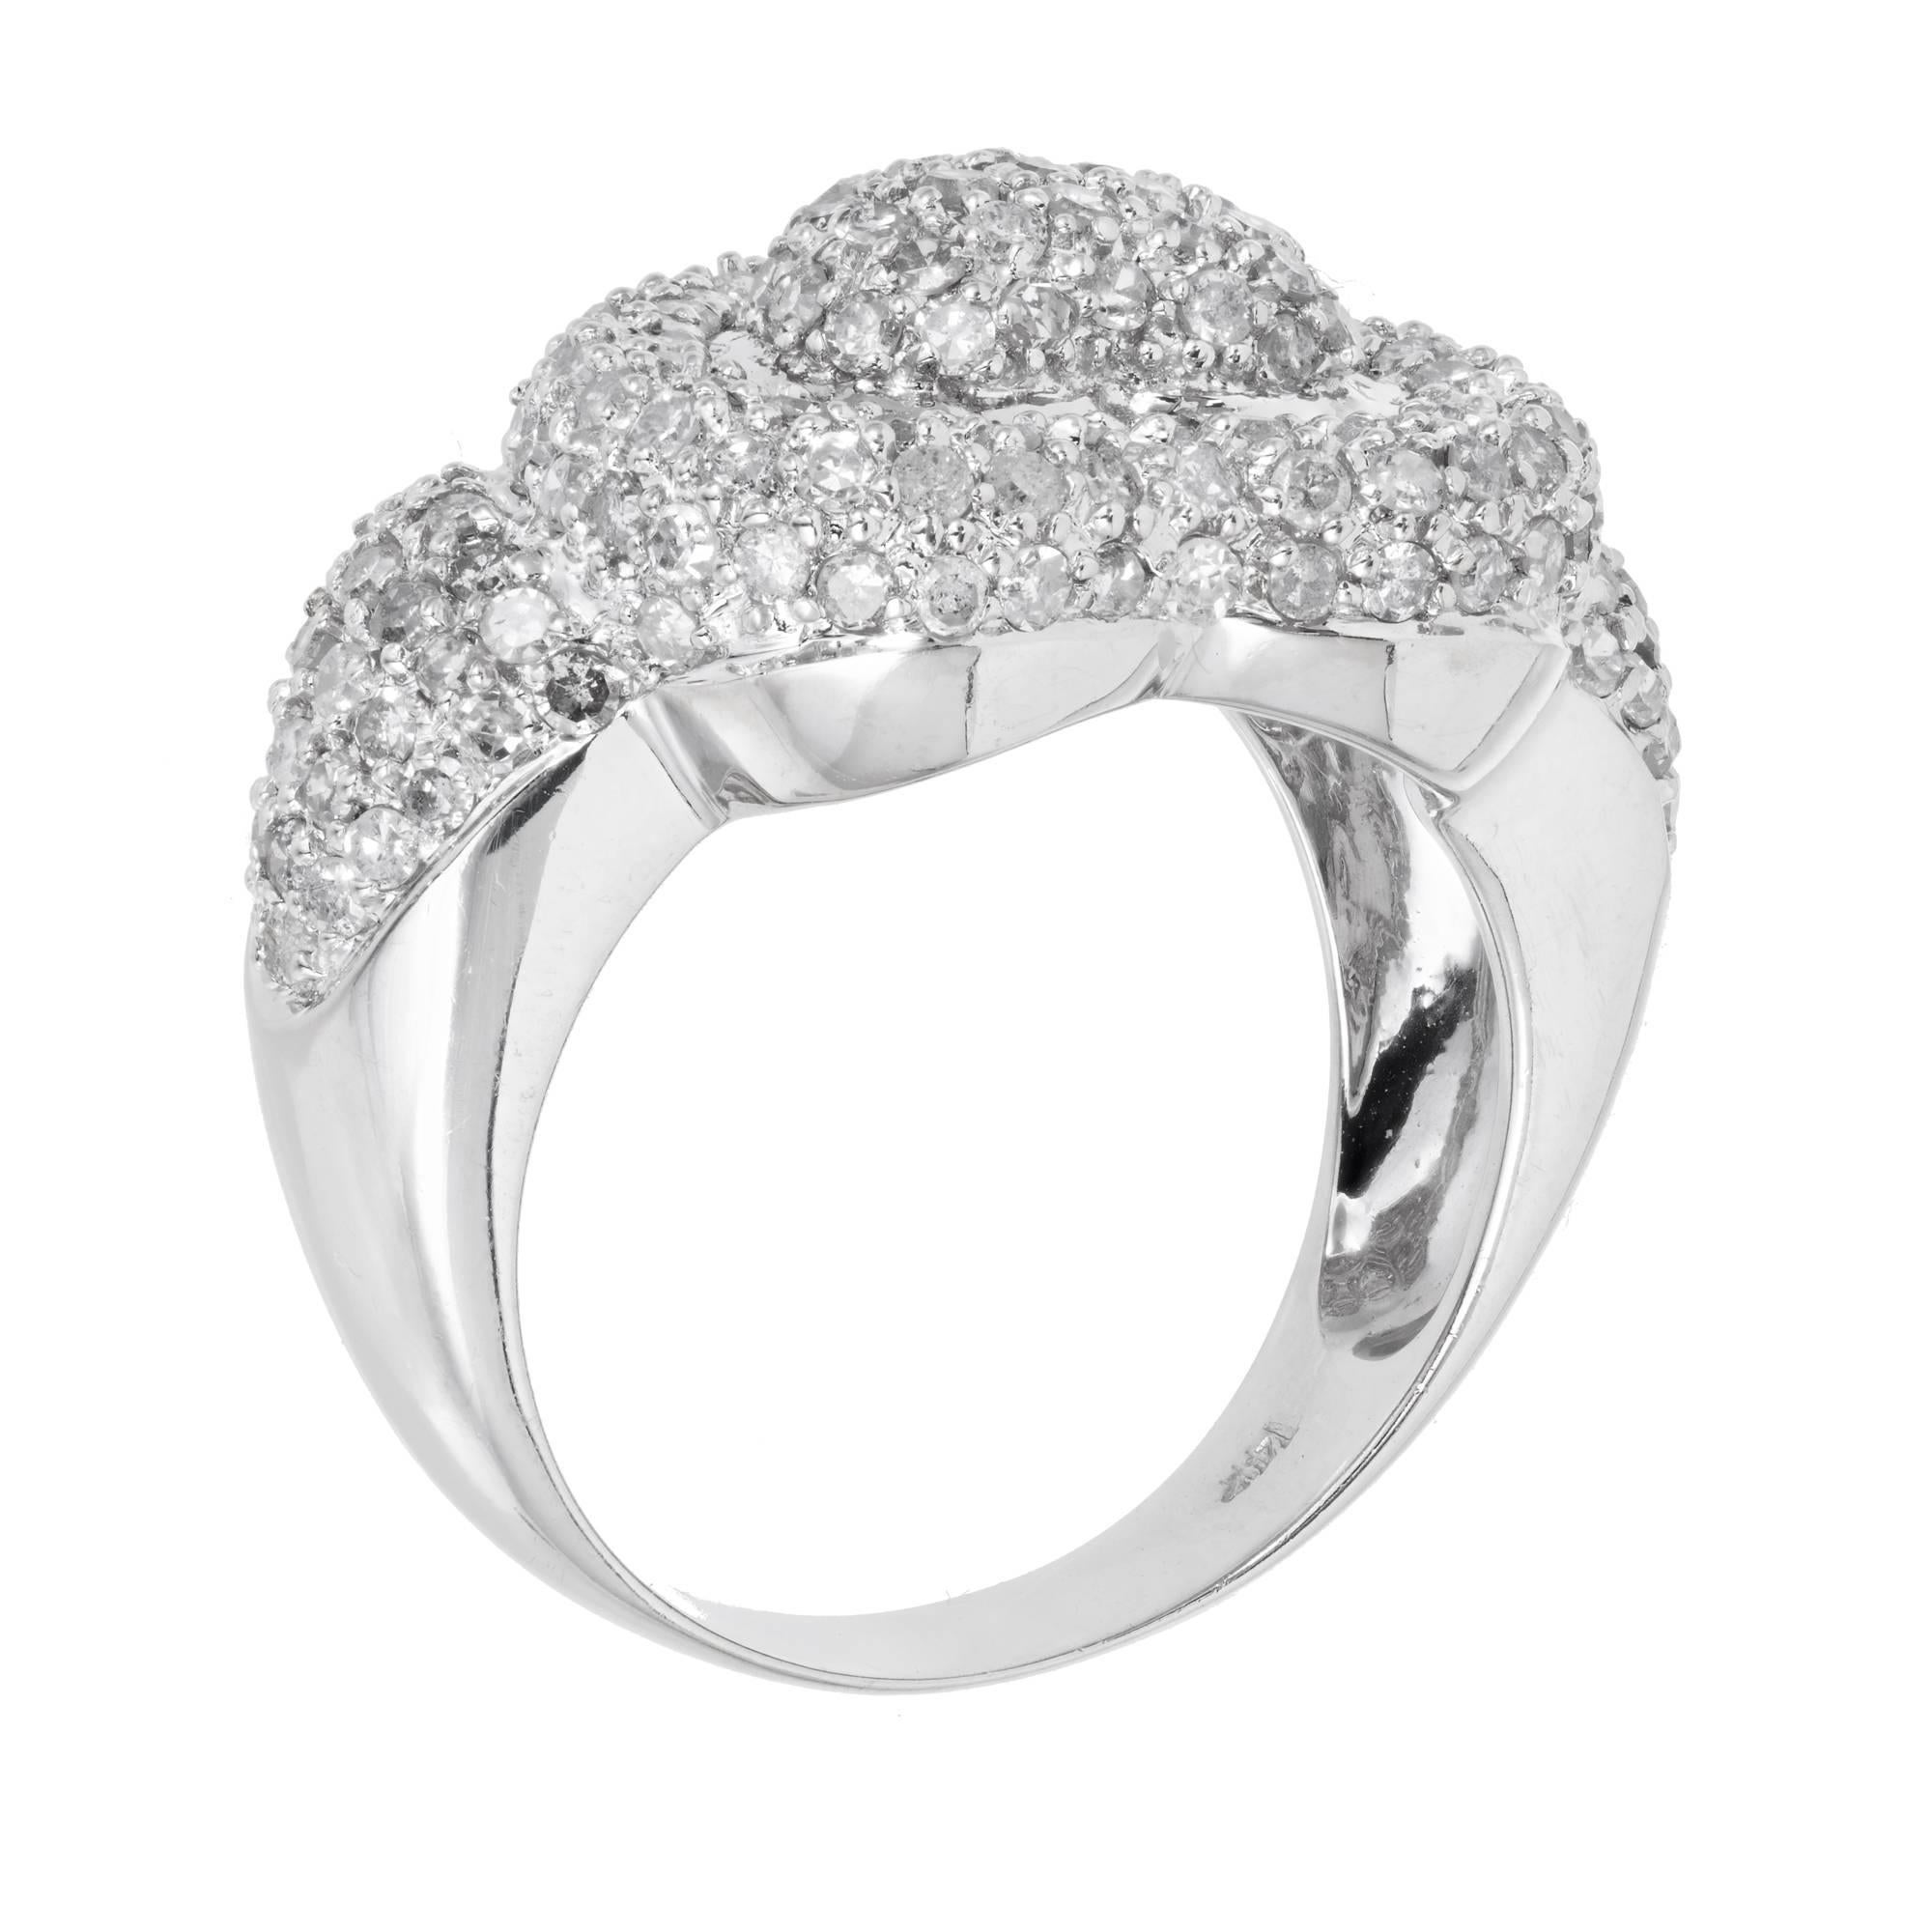 2.75 Carat Domed Diamond White Gold Heart Cocktail Ring 1